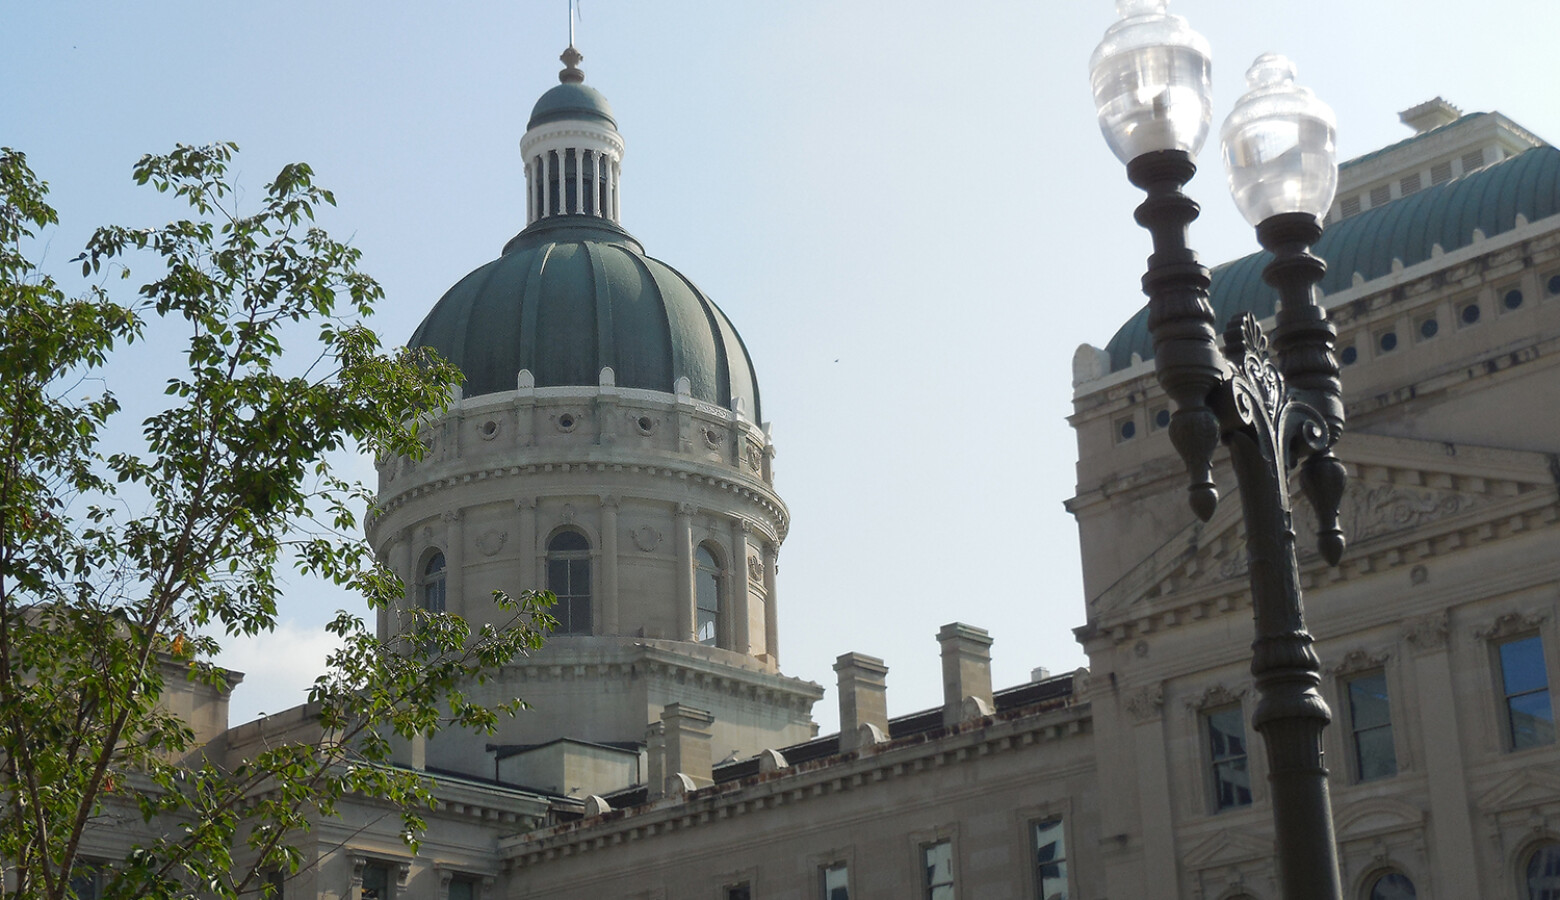 Indiana legislators created more than 200 new laws this year, and most of them take effect July 1. (Lauren Chapman/IPB News)